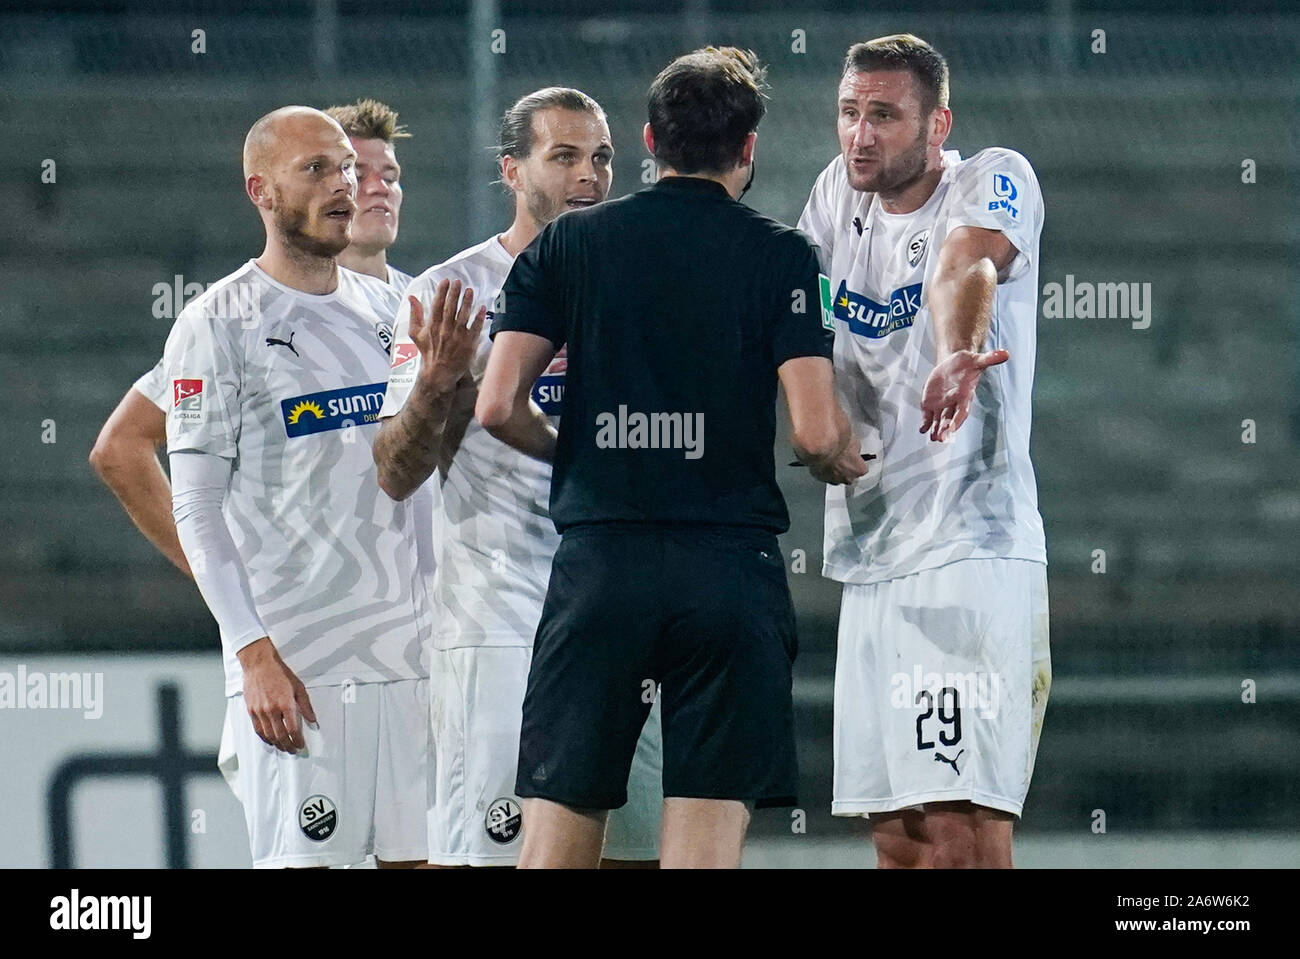 Sandhausen, Germany. 28th Oct, 2019. Soccer: 2nd Bundesliga, SV Sandhausen - SV Wehen Wiesbaden, 11th matchday, in the Hardtwaldstadion. Sandhausens Ivan Paurevic (r) discussed after the red card against him with referee Lasse Koslowski. Credit: Uwe Anspach/dpa - IMPORTANT NOTE: In accordance with the requirements of the DFL Deutsche Fußball Liga or the DFB Deutscher Fußball-Bund, it is prohibited to use or have used photographs taken in the stadium and/or the match in the form of sequence images and/or video-like photo sequences./dpa/Alamy Live News Stock Photo